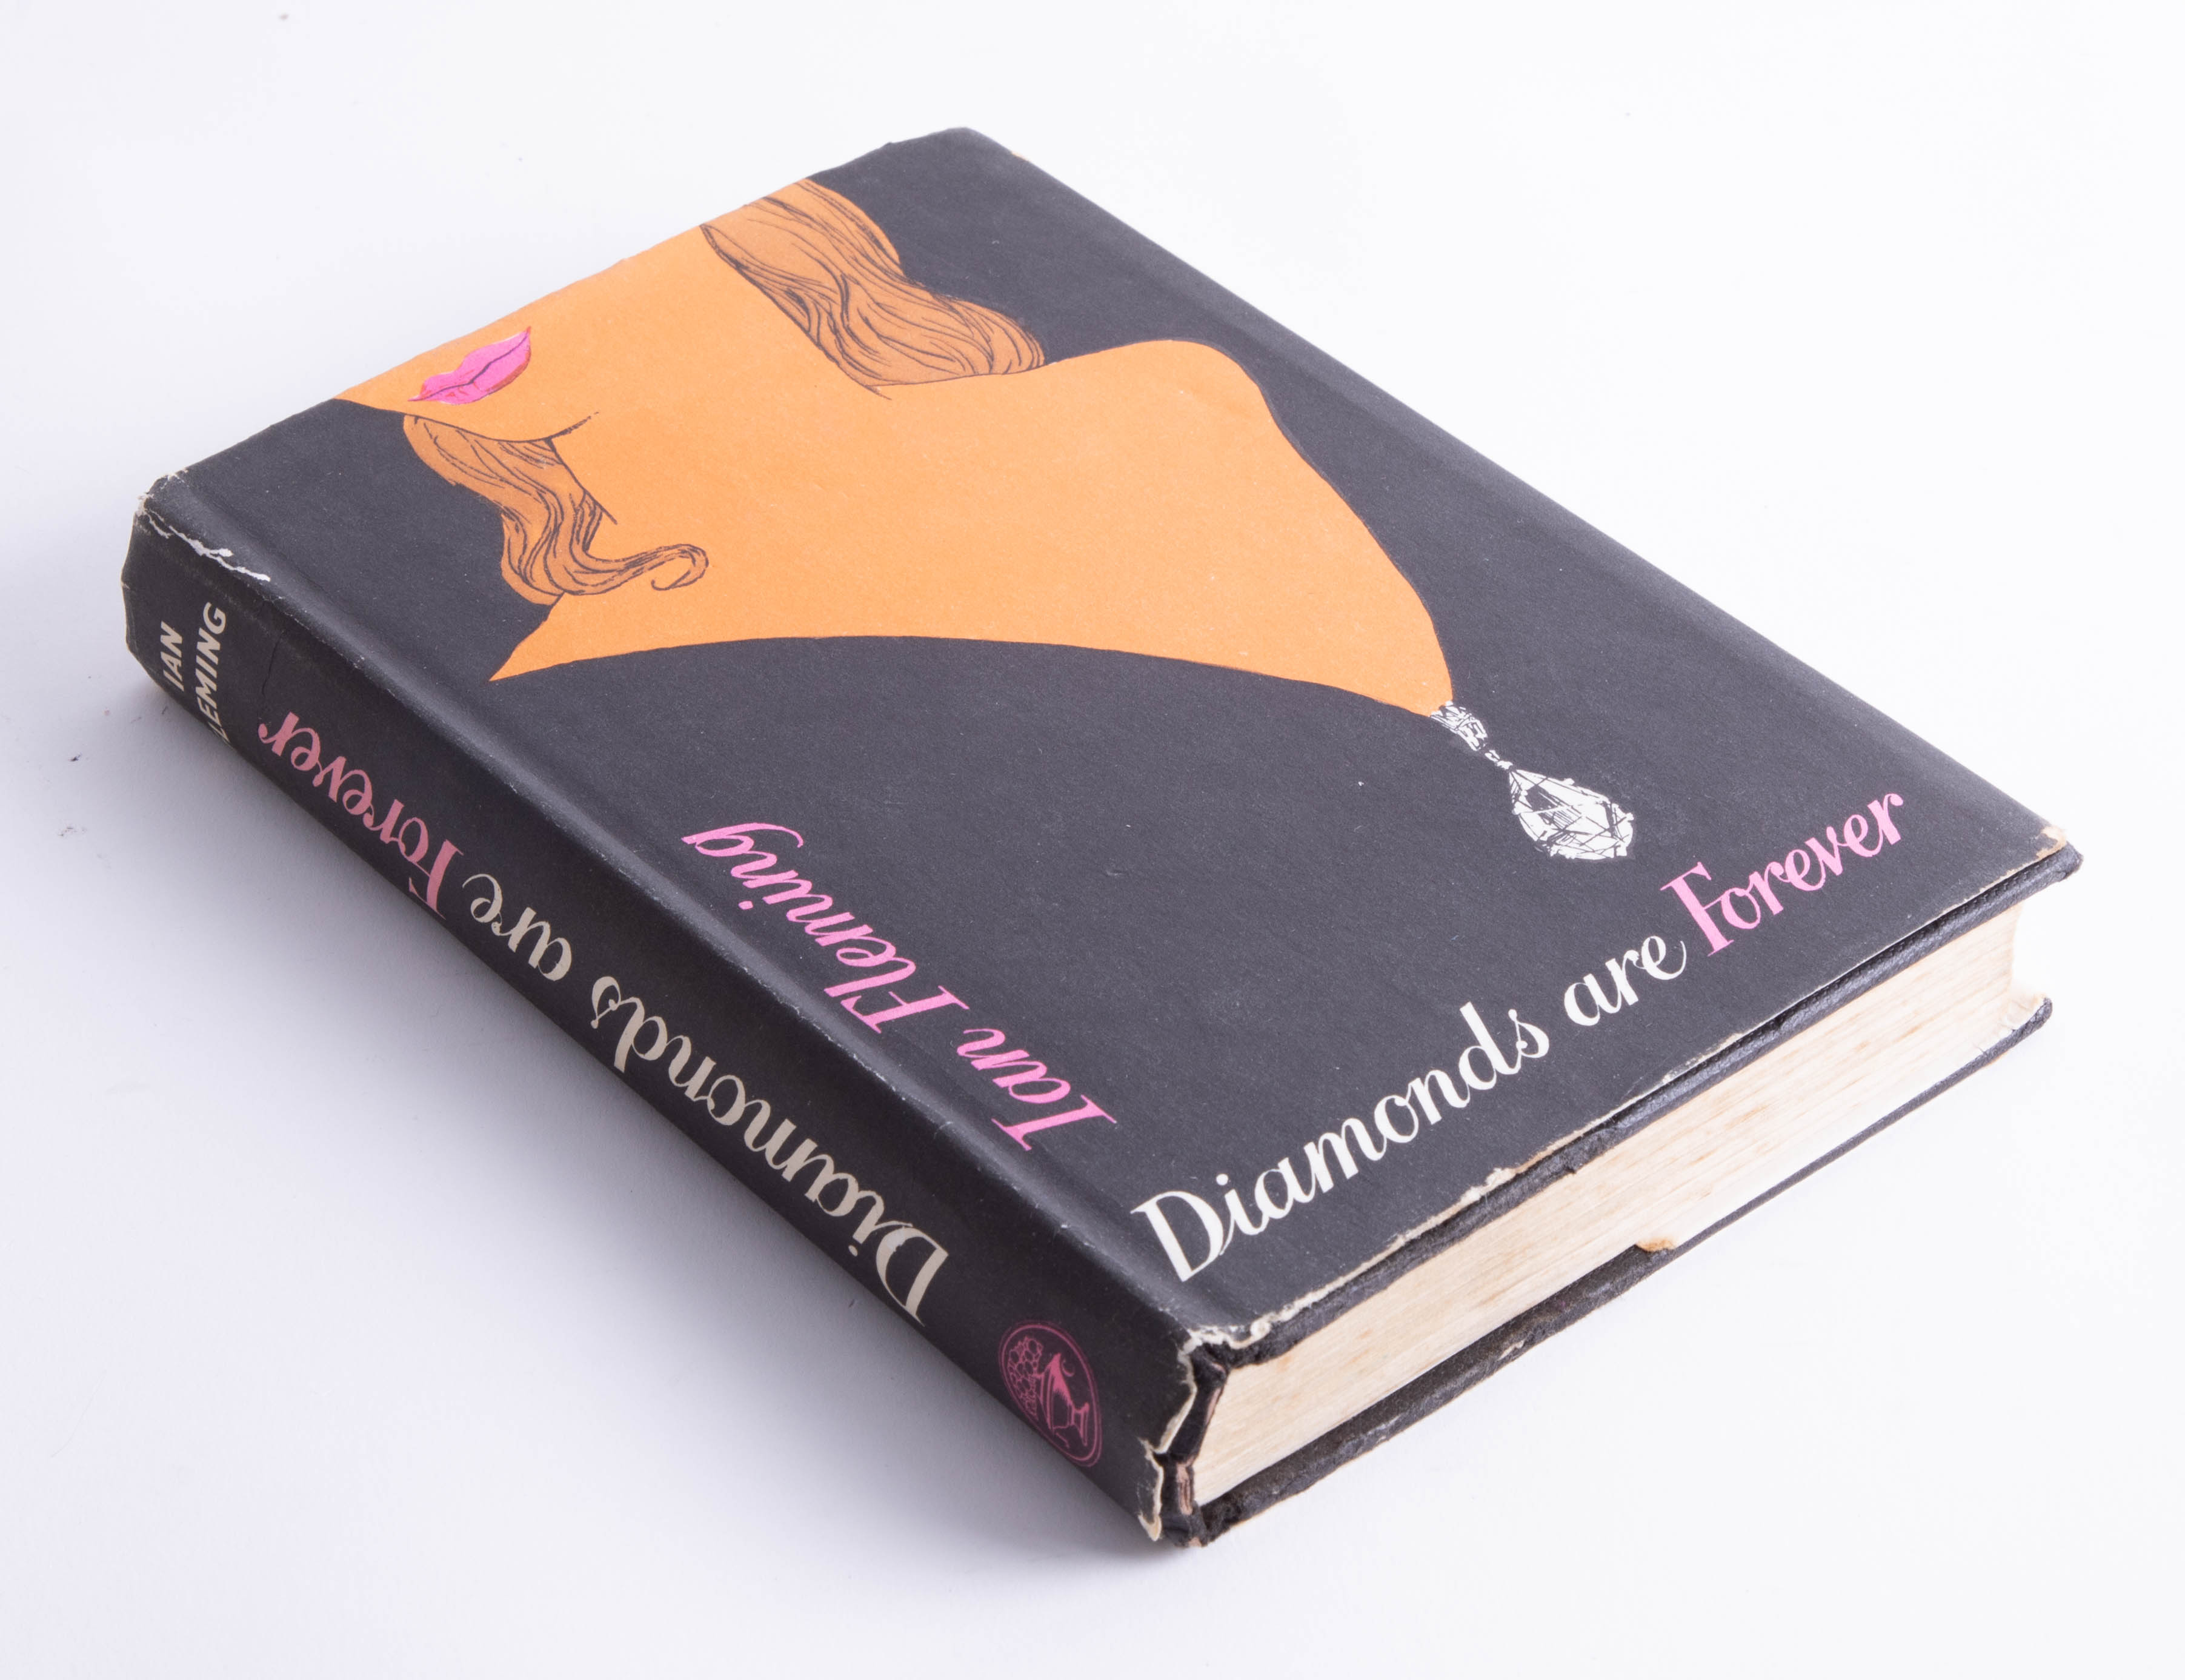 Ian Fleming, 'Diamonds are Forever', 1964 first edition/seventh impression.